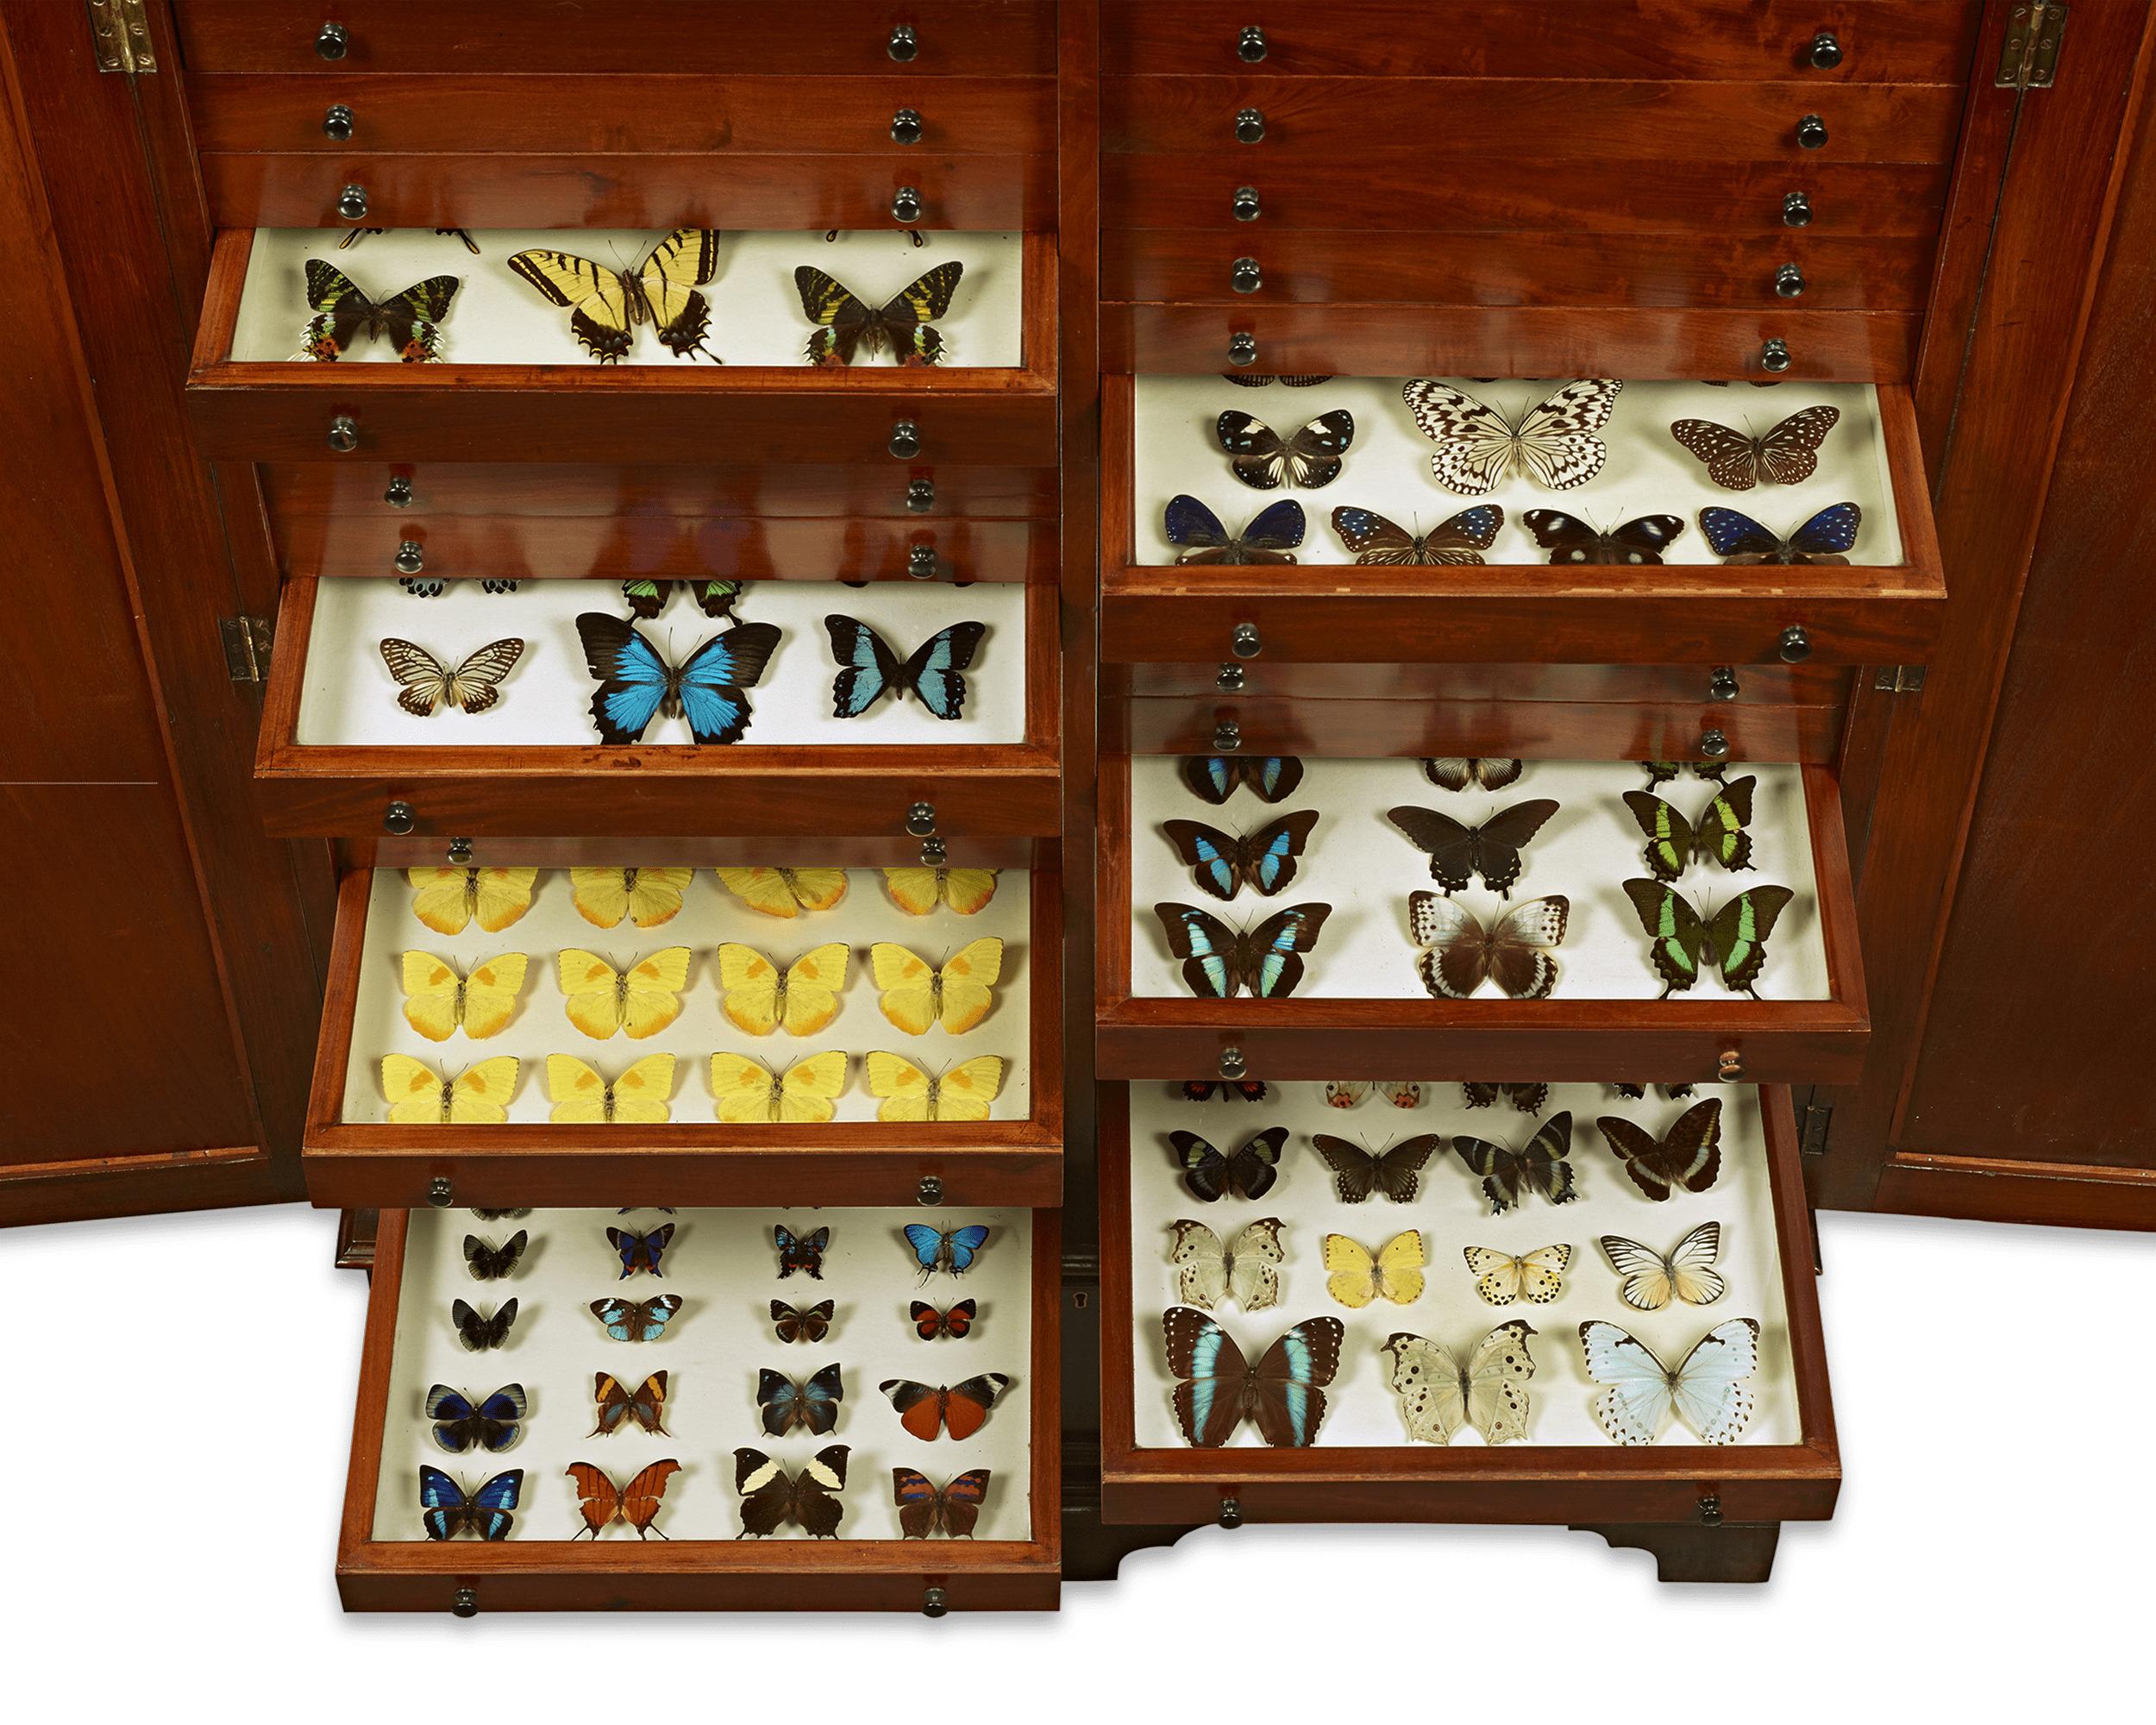 This beautiful mahogany cabinet houses an extraordinary collection of butterflies from exotic locations around the world. Hundreds of specimens are brilliantly preserved and labeled in 40 drawers, with close-fitting glass tops to insulate from